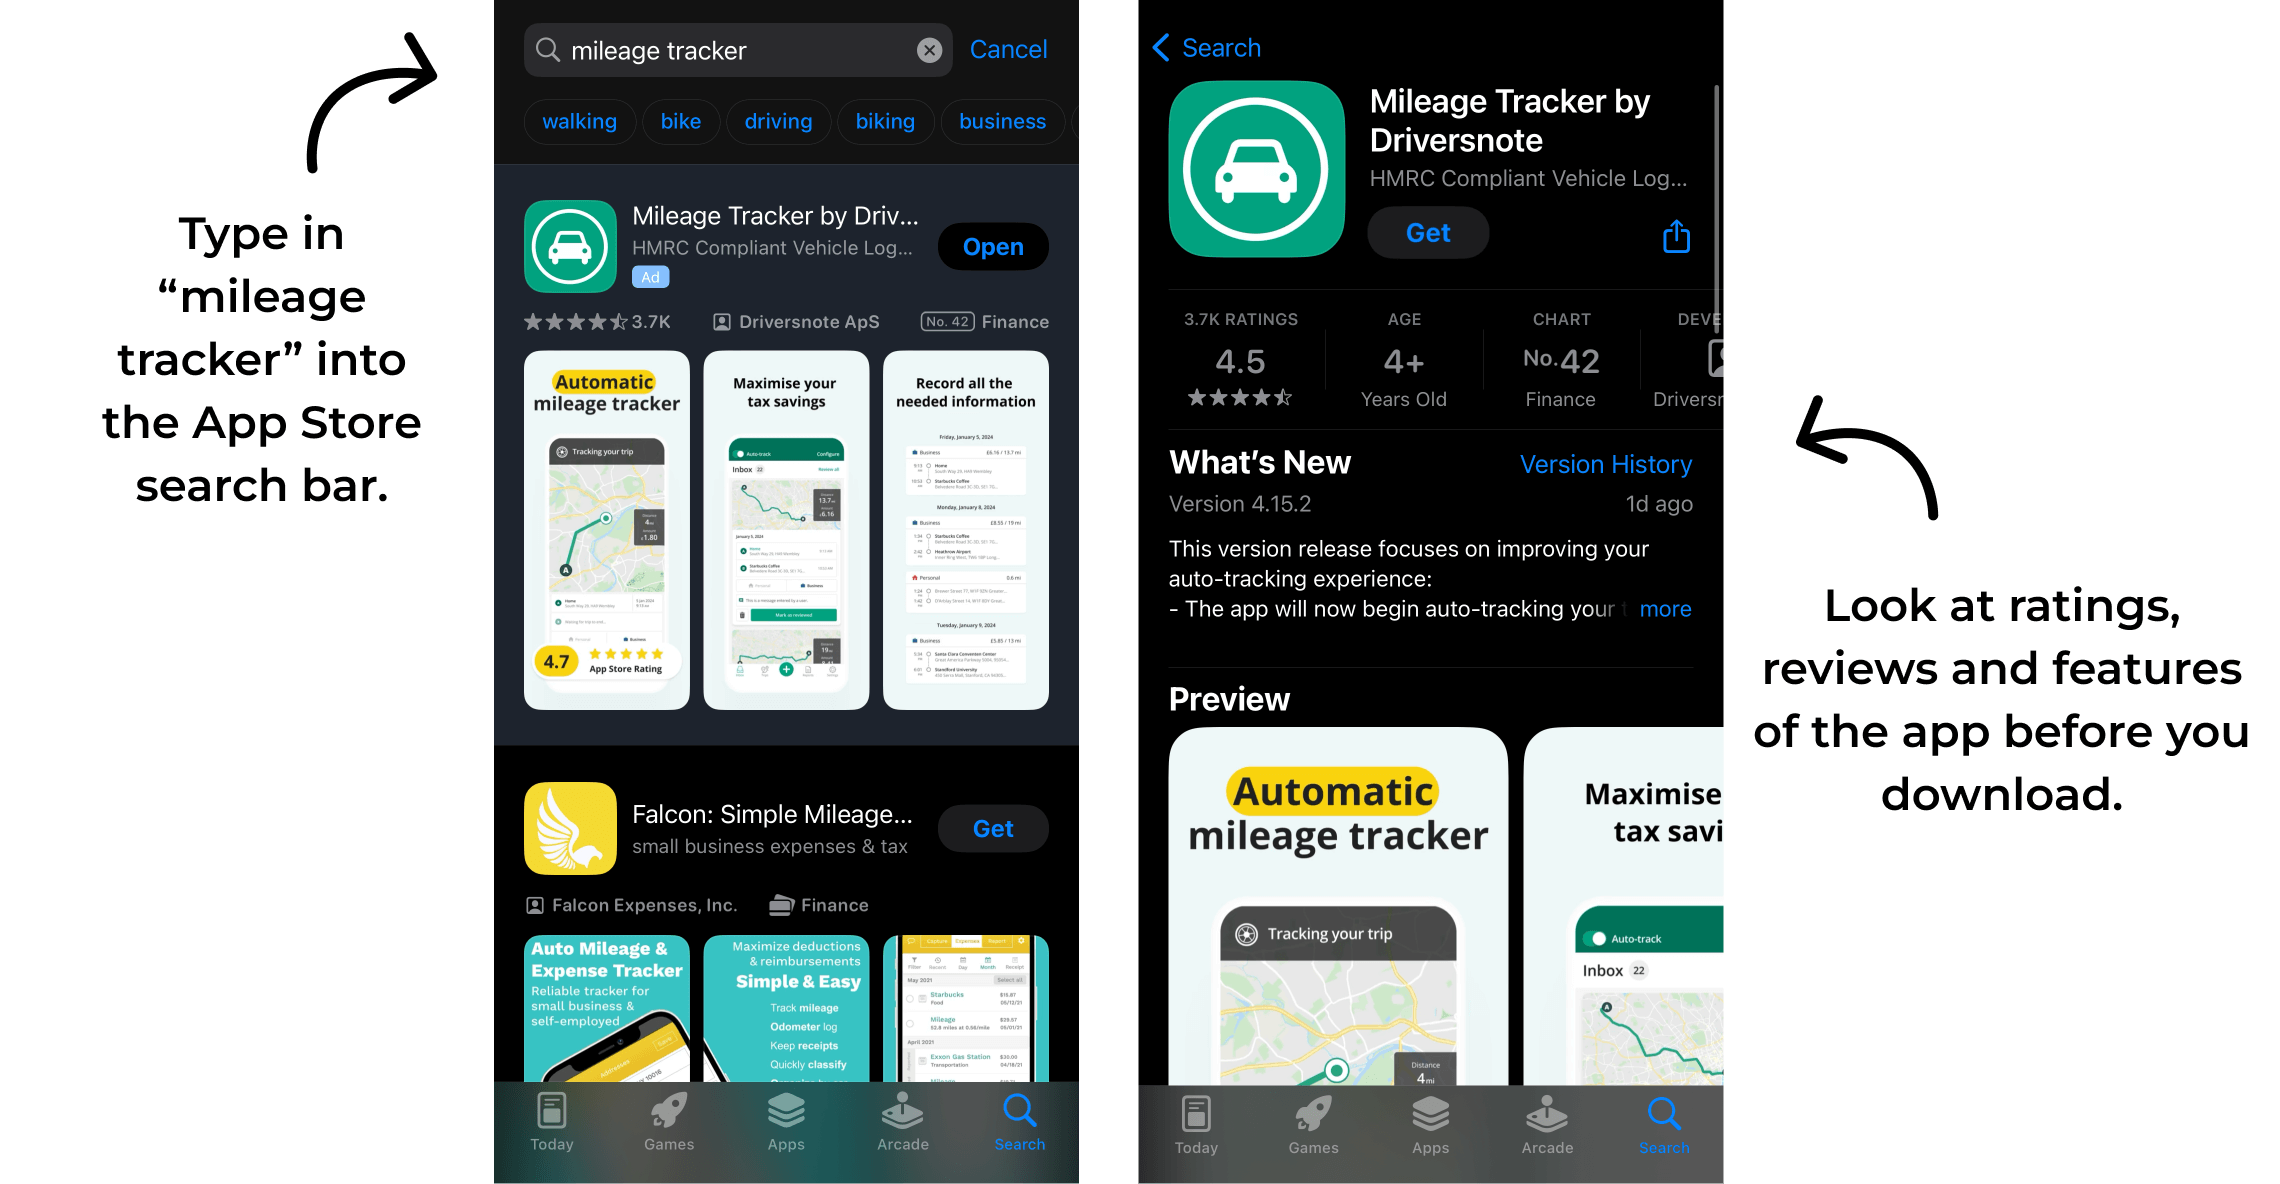 How to search for mileage tracker apps in App Store